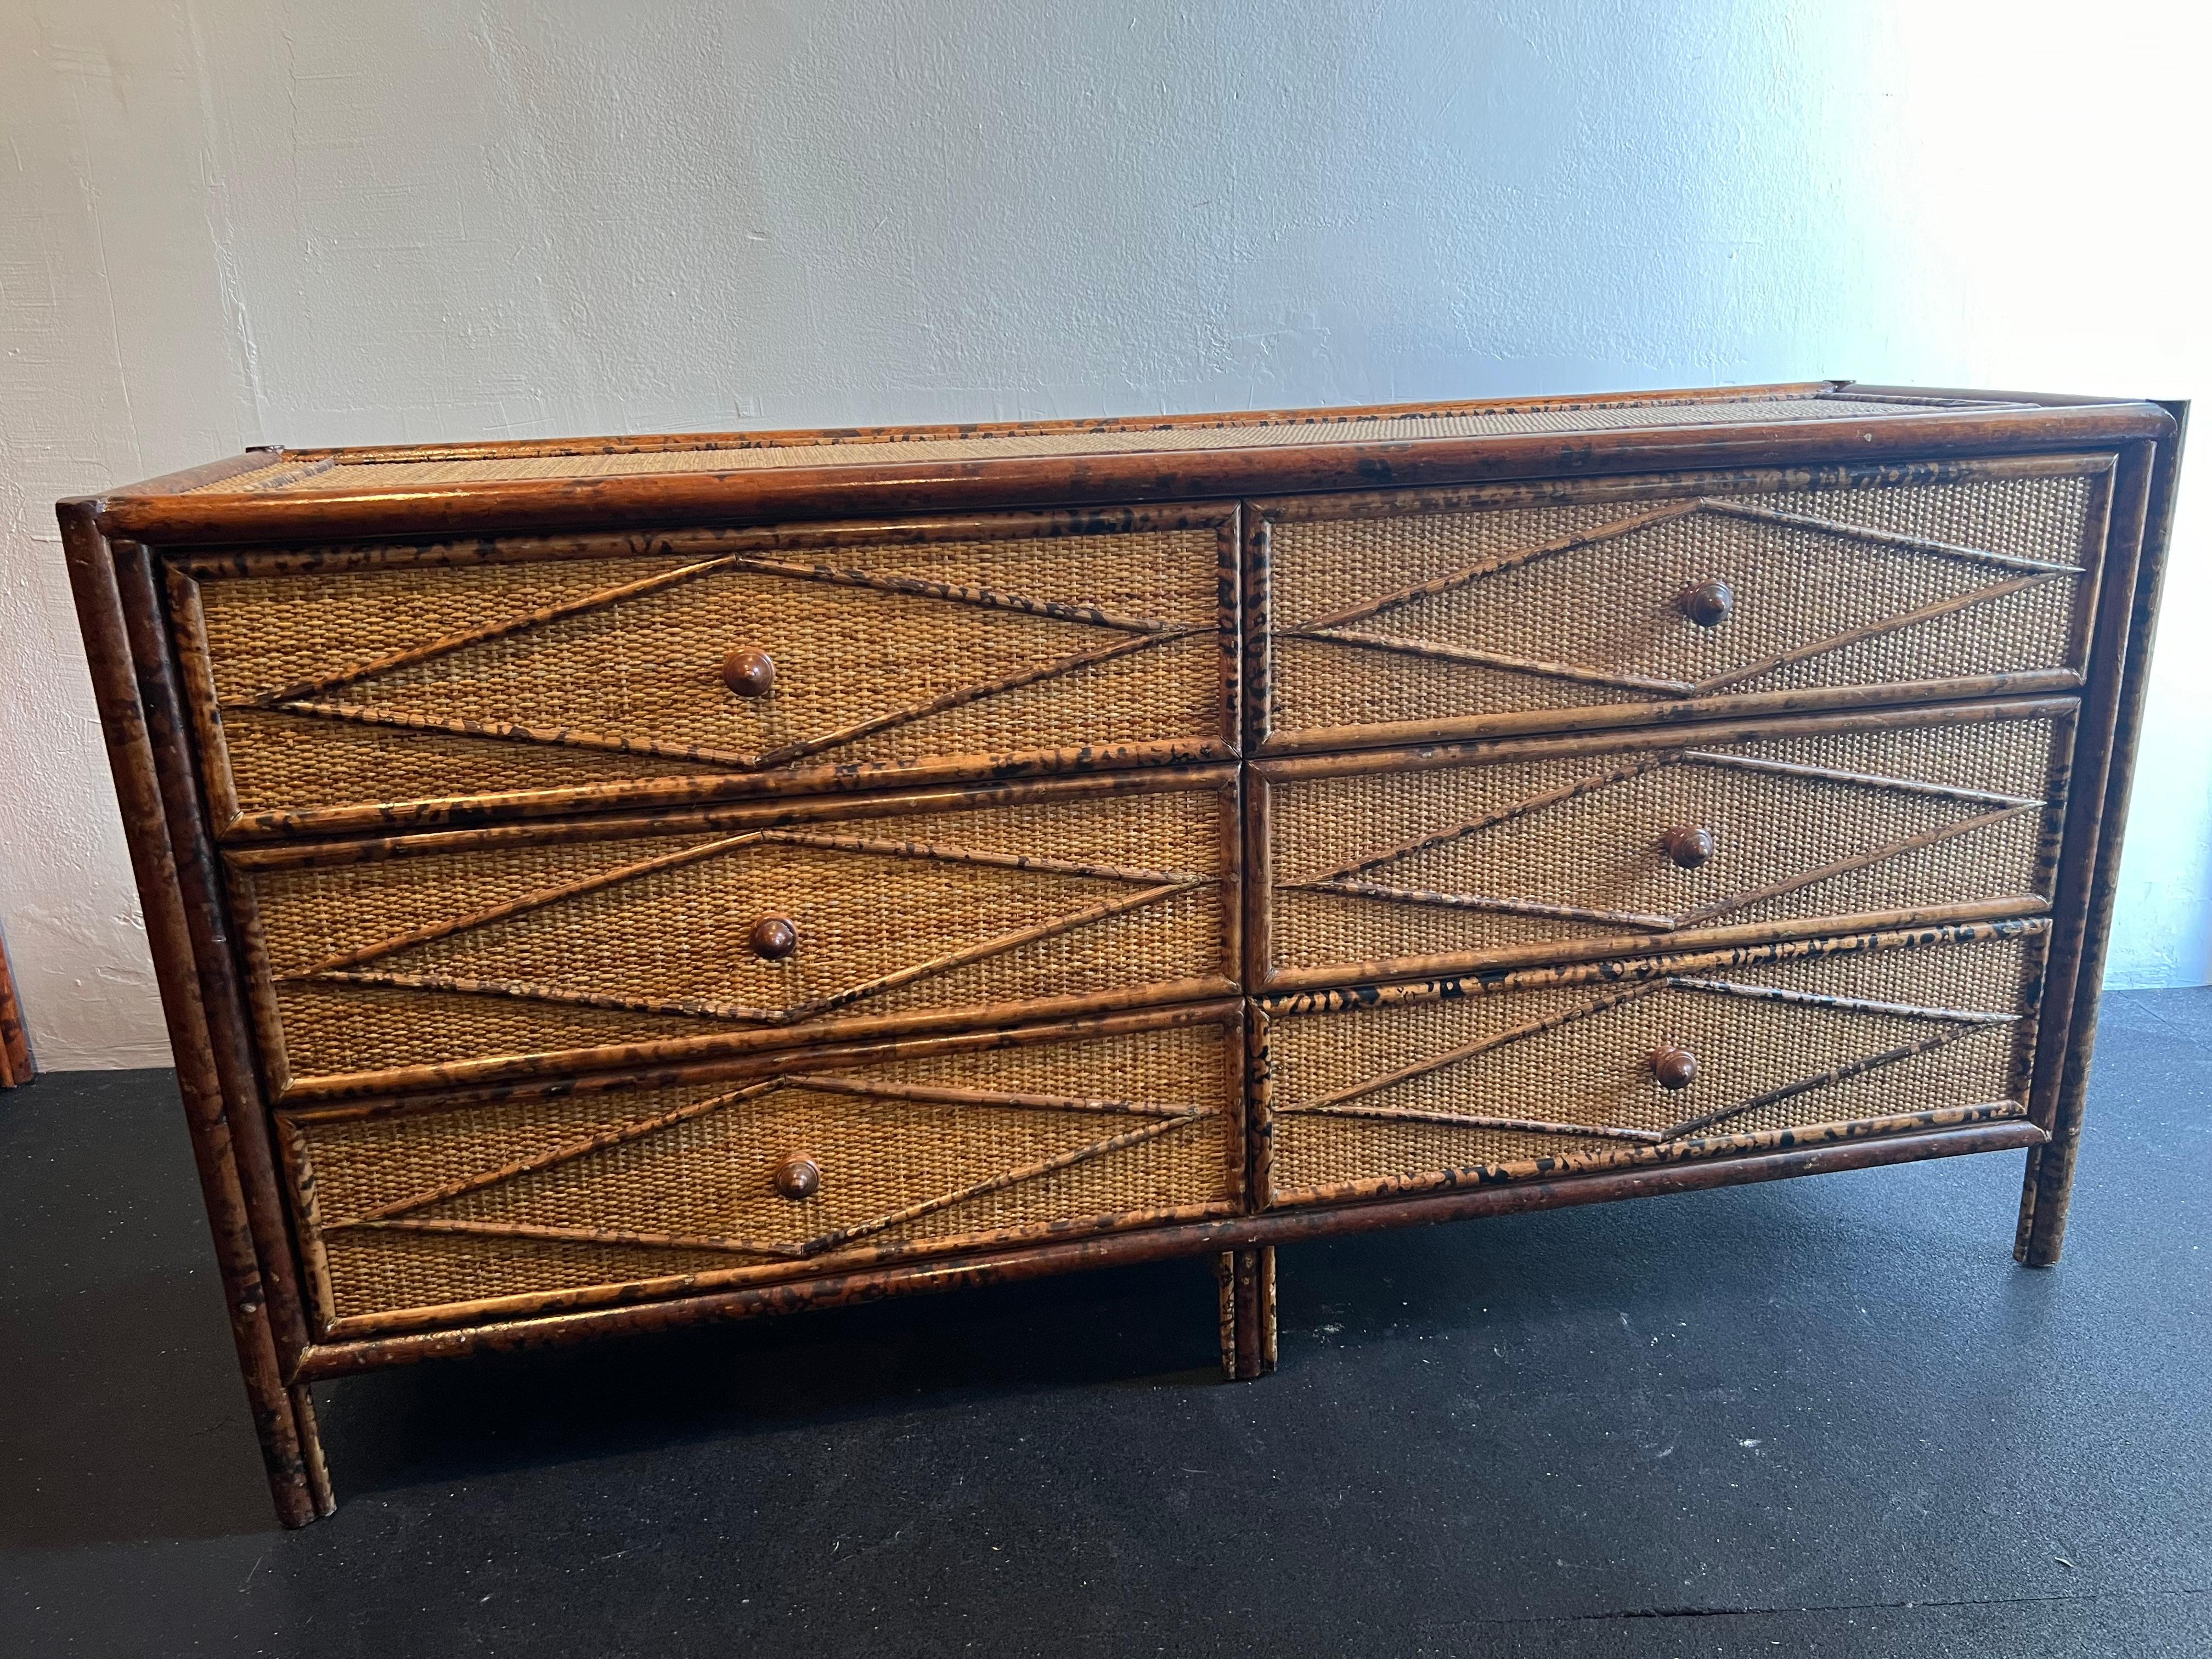 British colonial style burnt bamboo and cane dresser. Wear to finish of cane and bamboo  (please refer to photos). Additional photos available upon request. 

Would work well in a variety of interiors such as modern, mid century modern, Hollywood